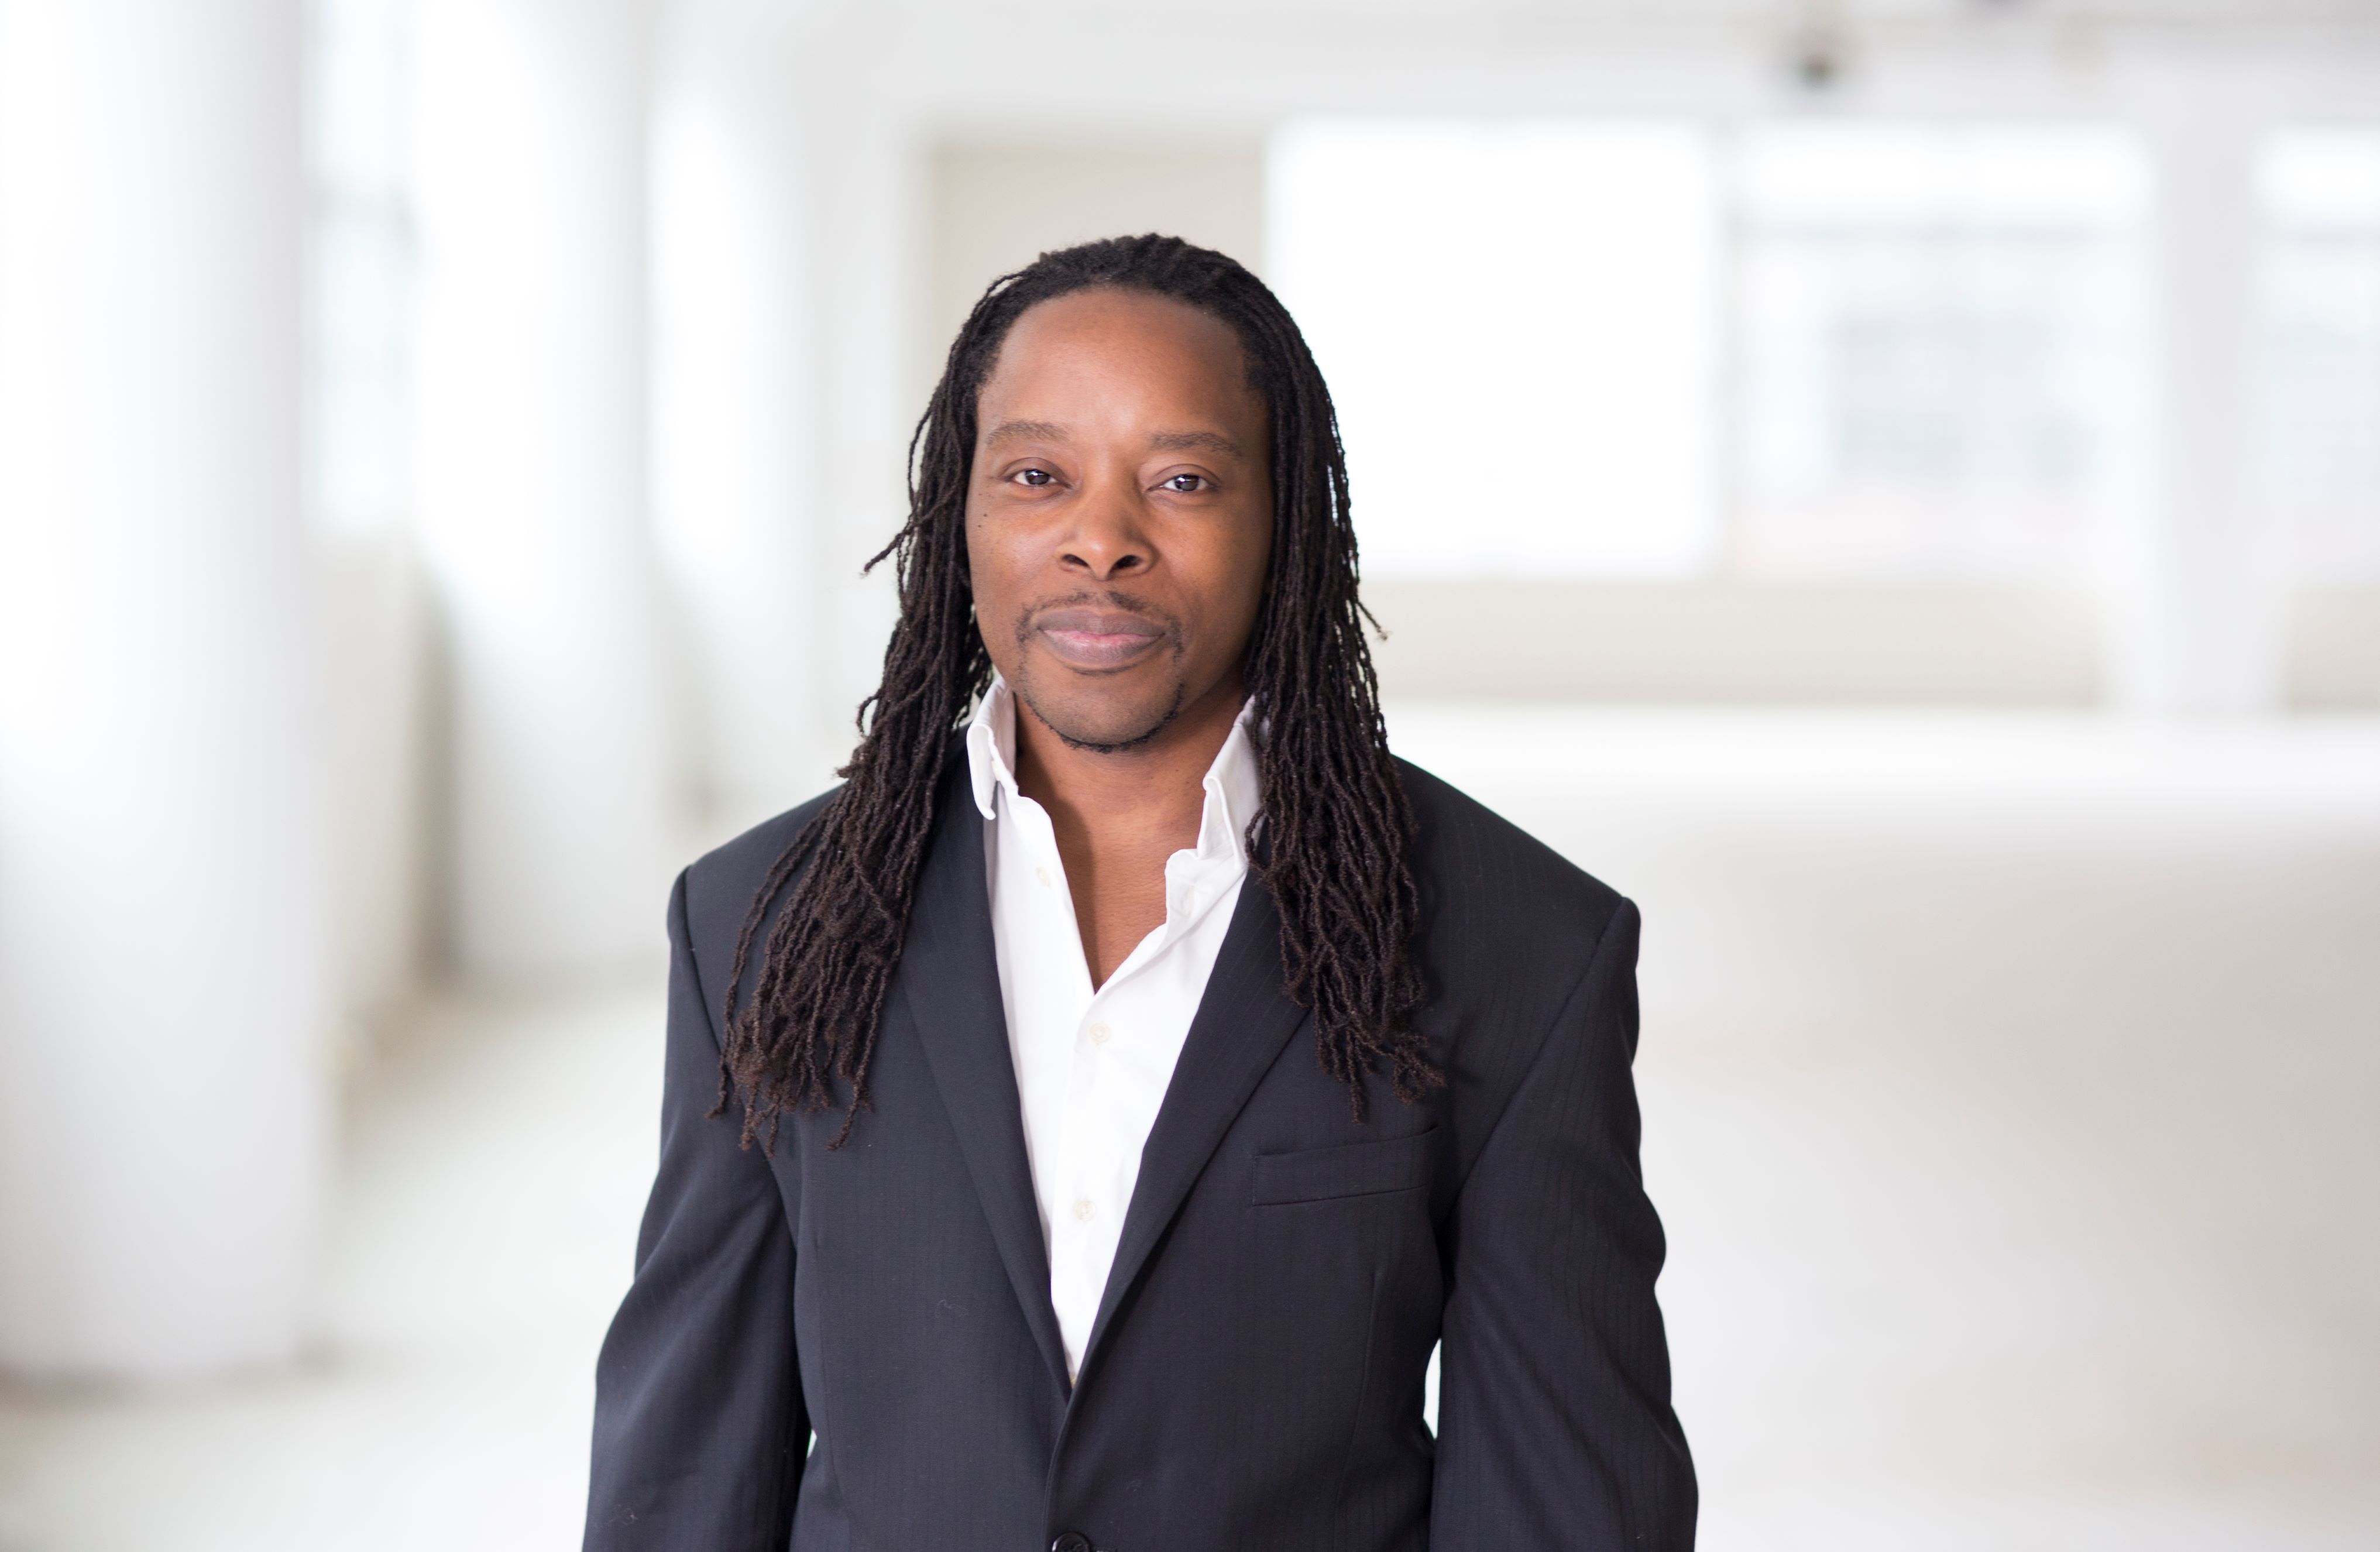 Dr. Omekongo Dibinga, a person with dark skin and black hair posing professionally wearing a dark suit.